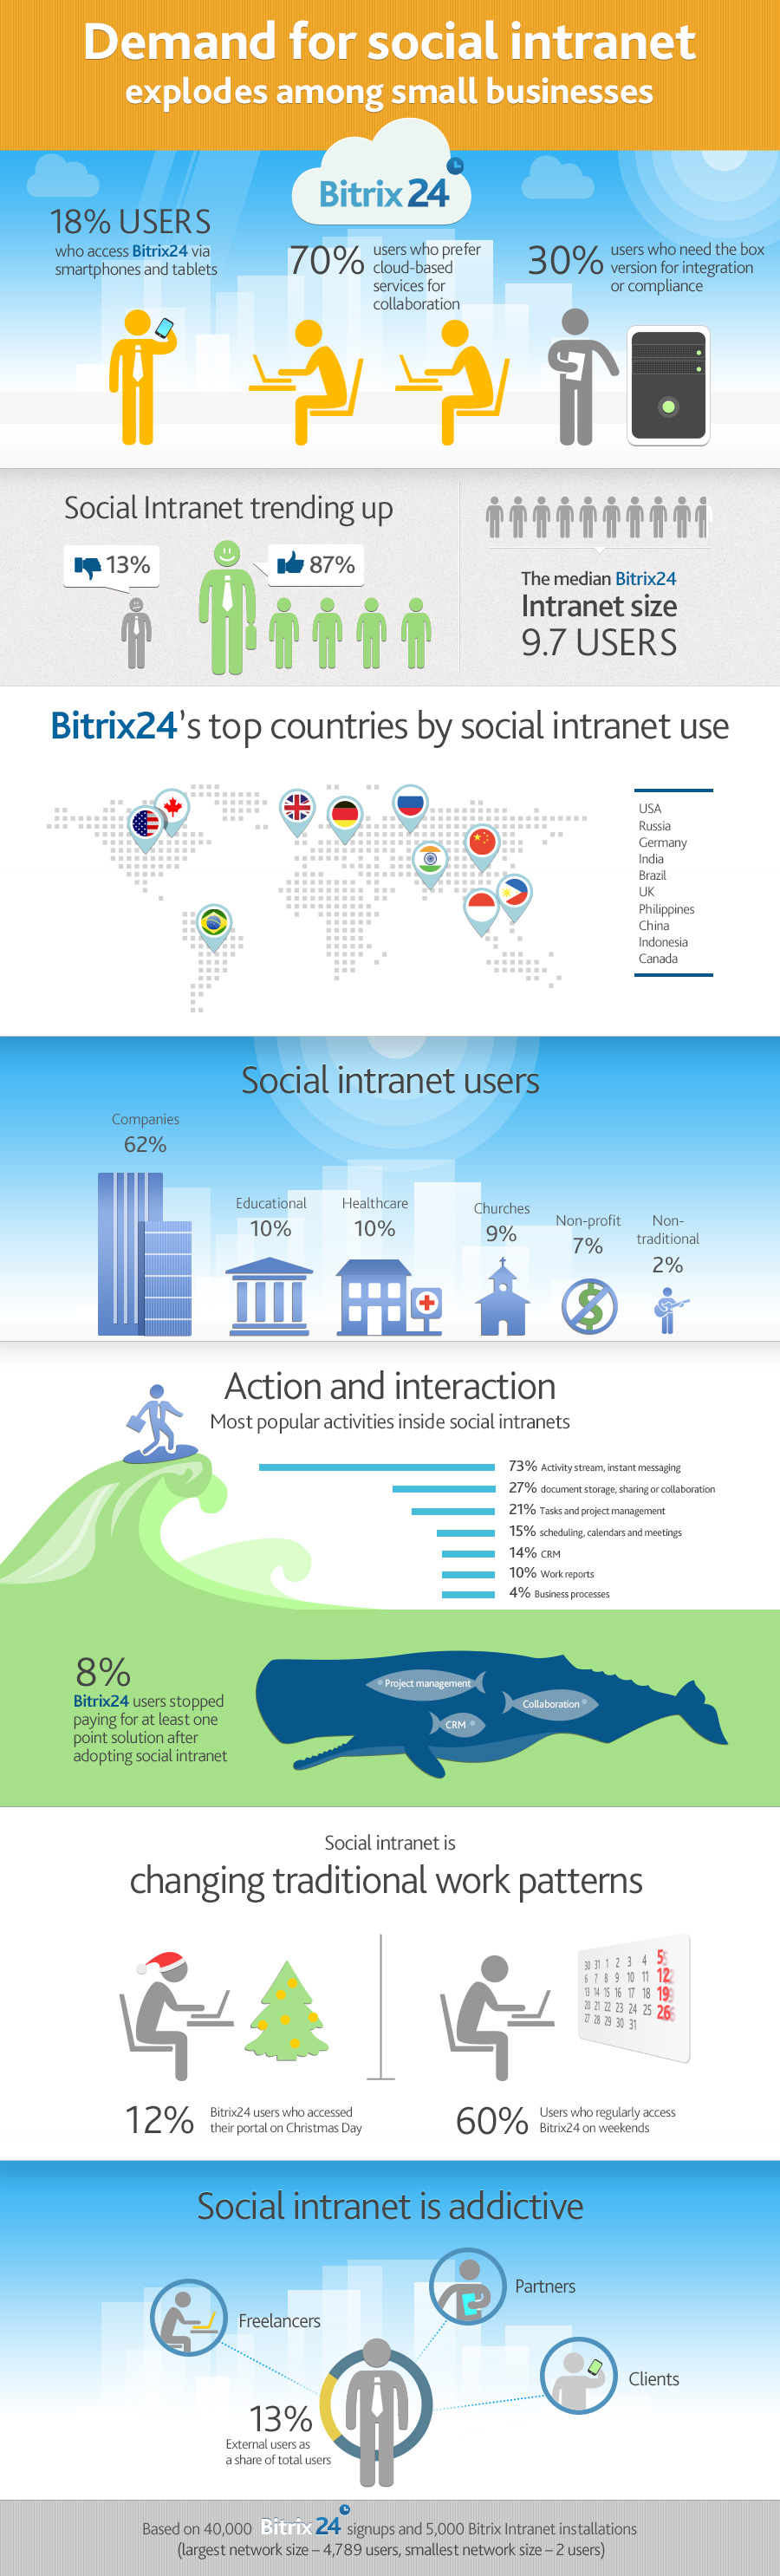 Social Intranet and Small Businesses